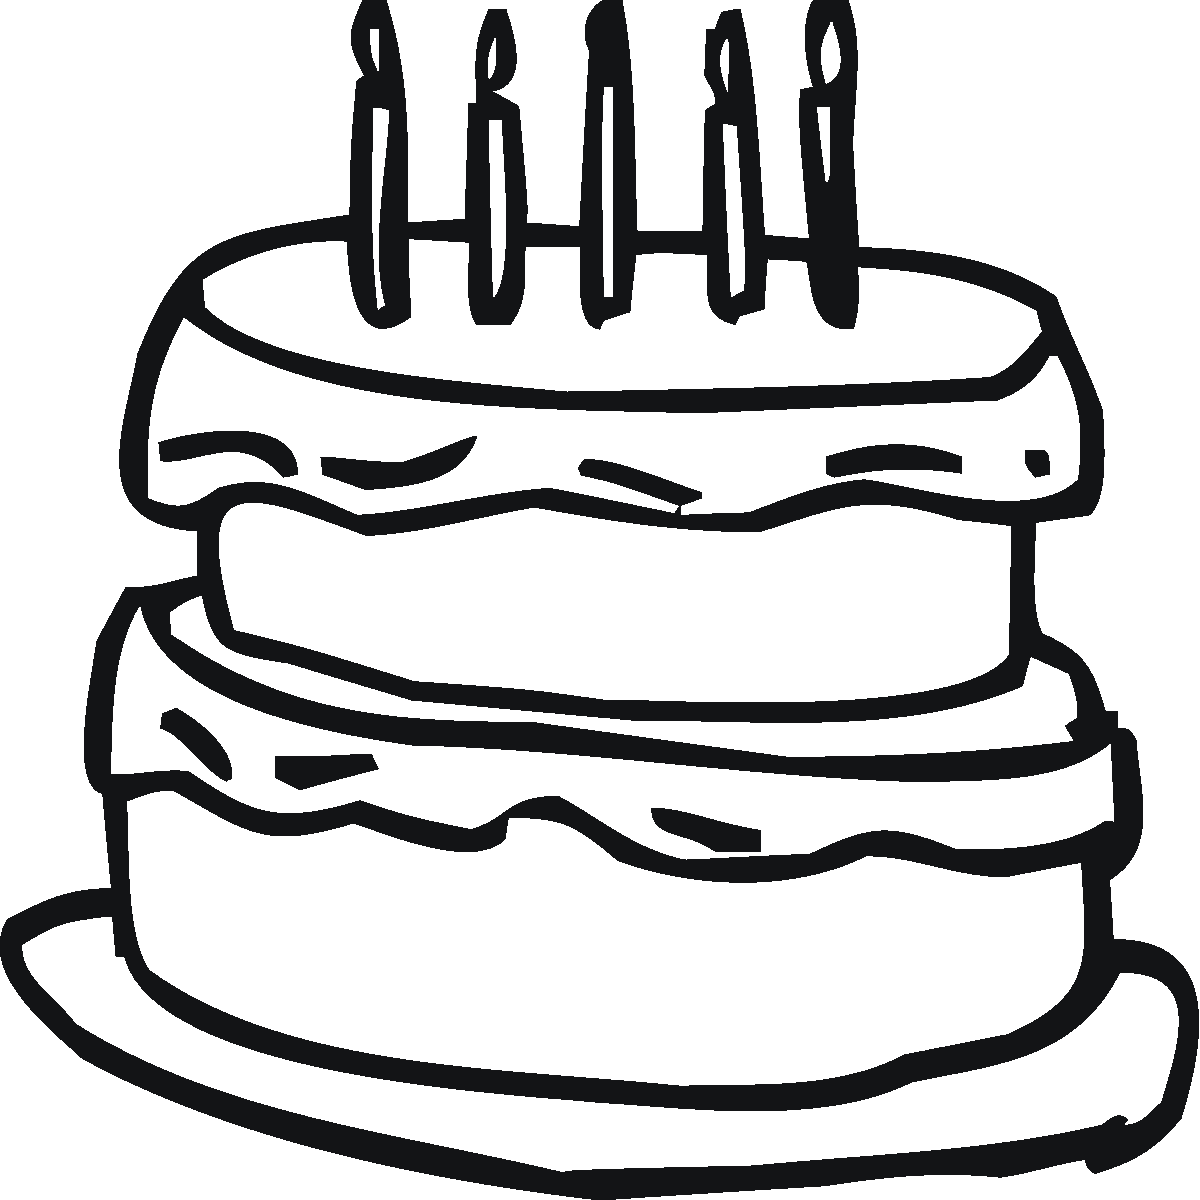 Birthday cake coloring pages to download and print for free